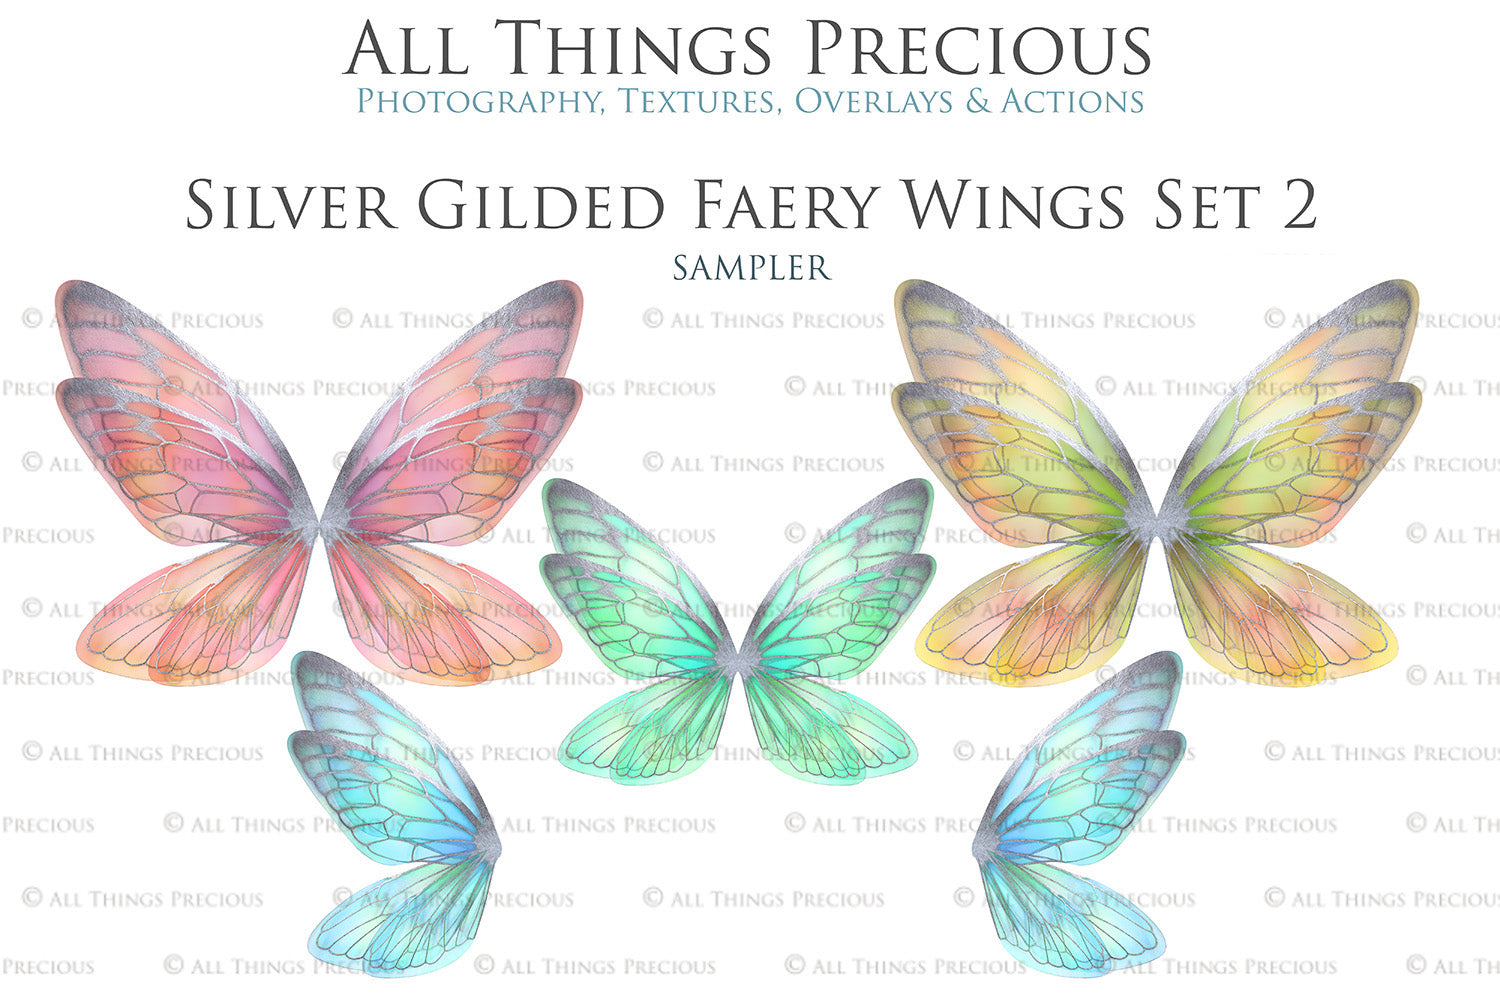 20 FAIRY WING Digital Overlays - SILVER GILDED Set 2